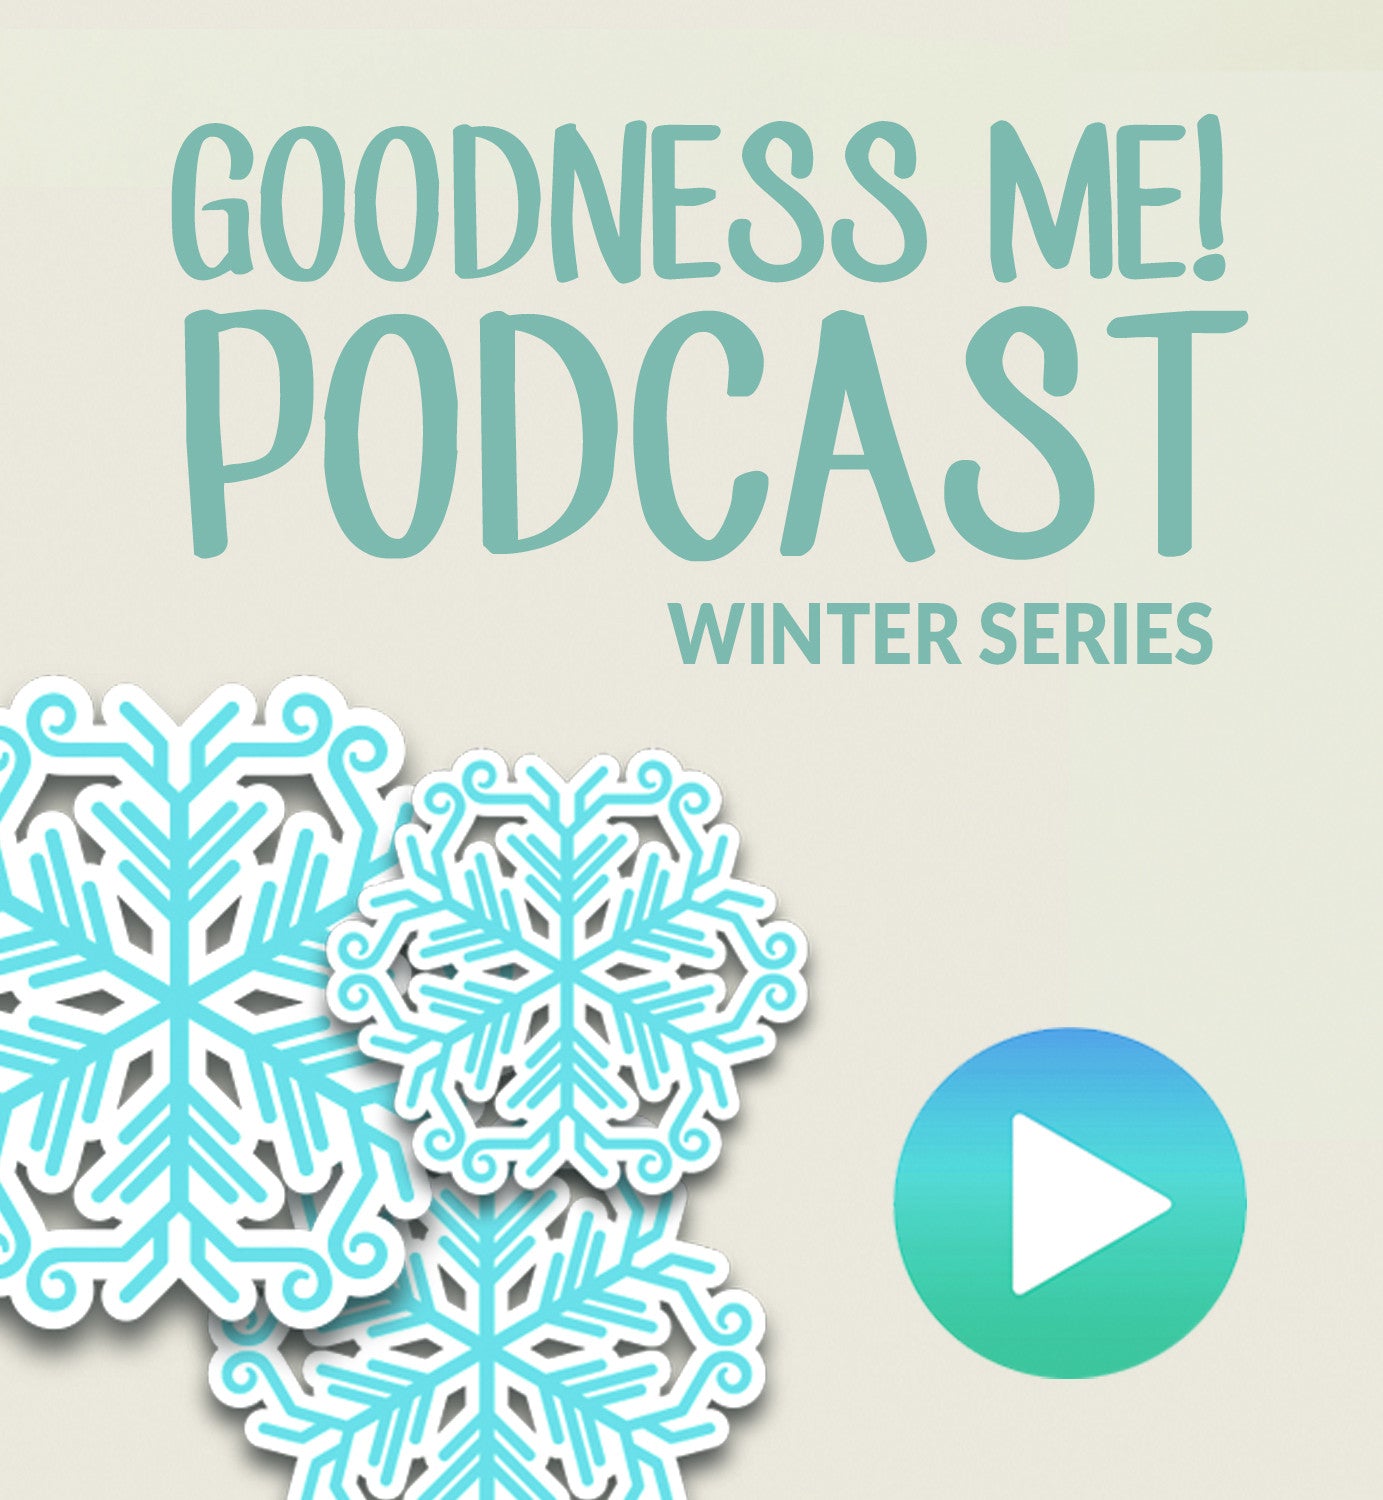 Jan 21 Goodness Me! Podcast - Part 2: What is Your Skin Telling You?